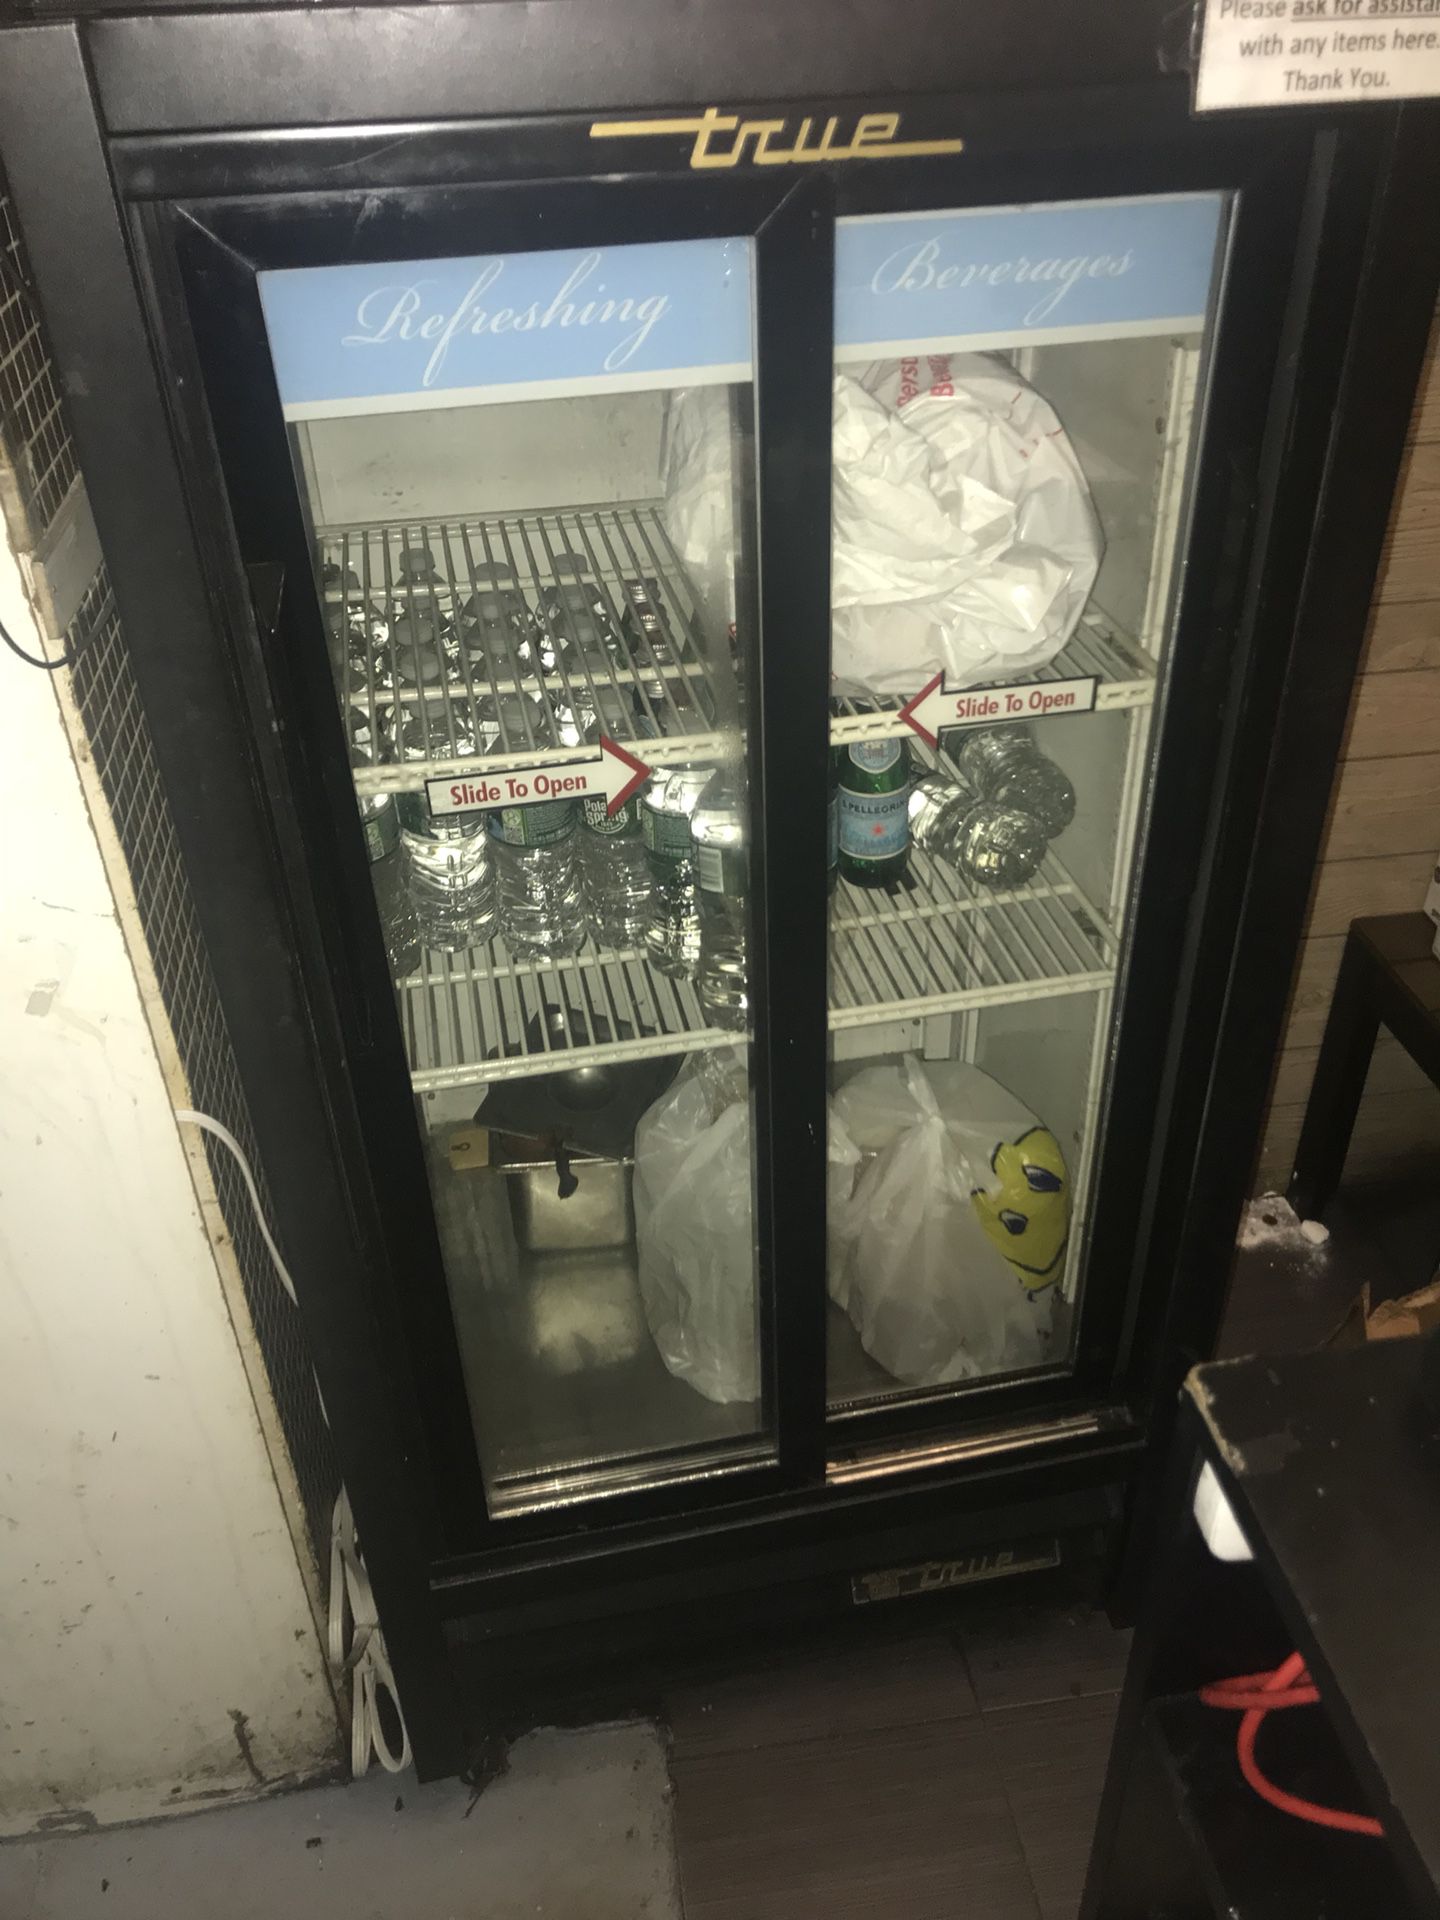 True commercial refrigerator 26 inch wide, must go fast